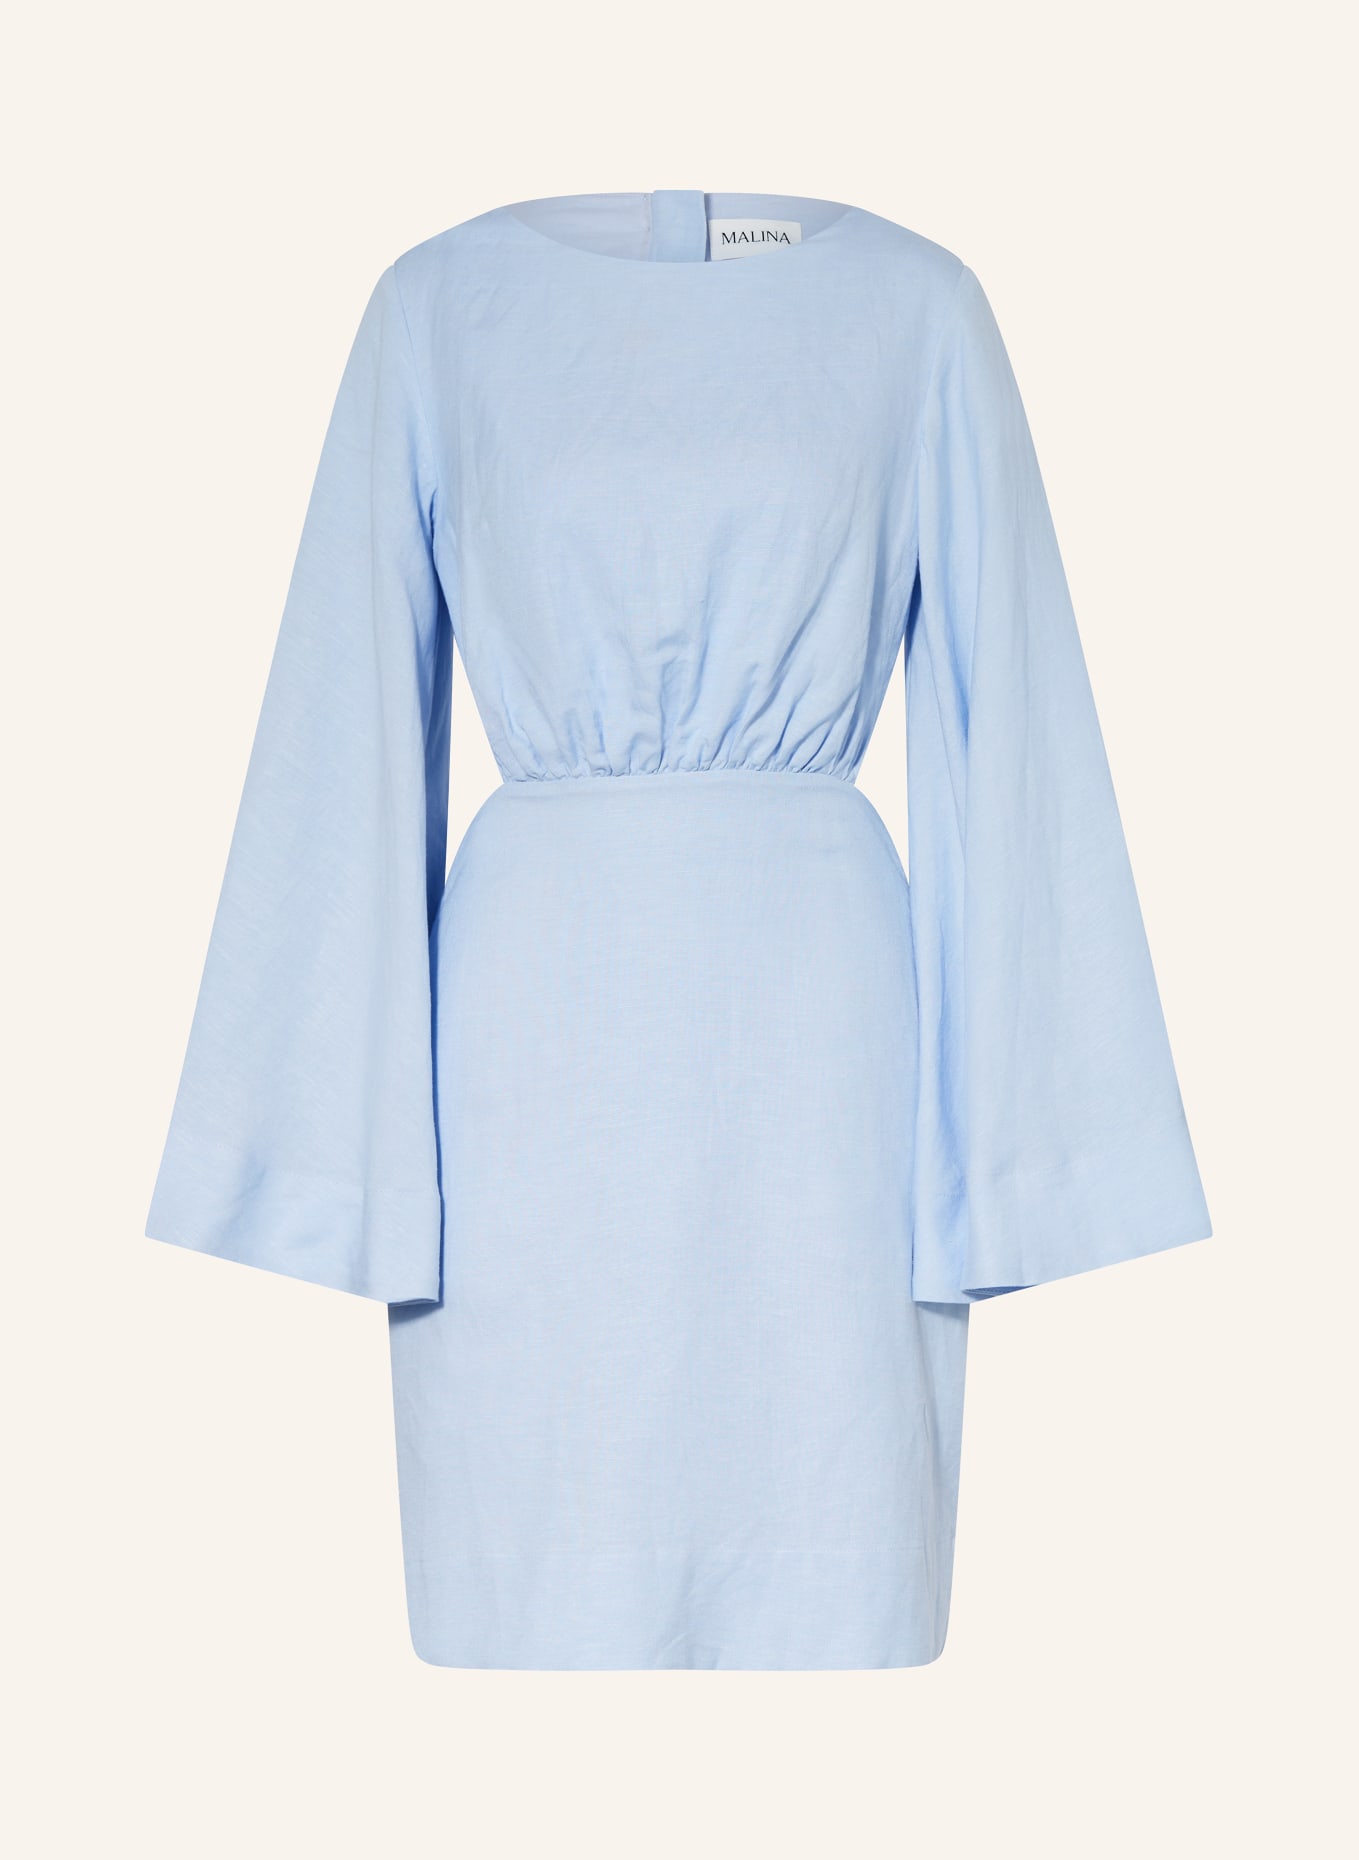 MALINA Dress with cut-out, Color: LIGHT BLUE (Image 1)